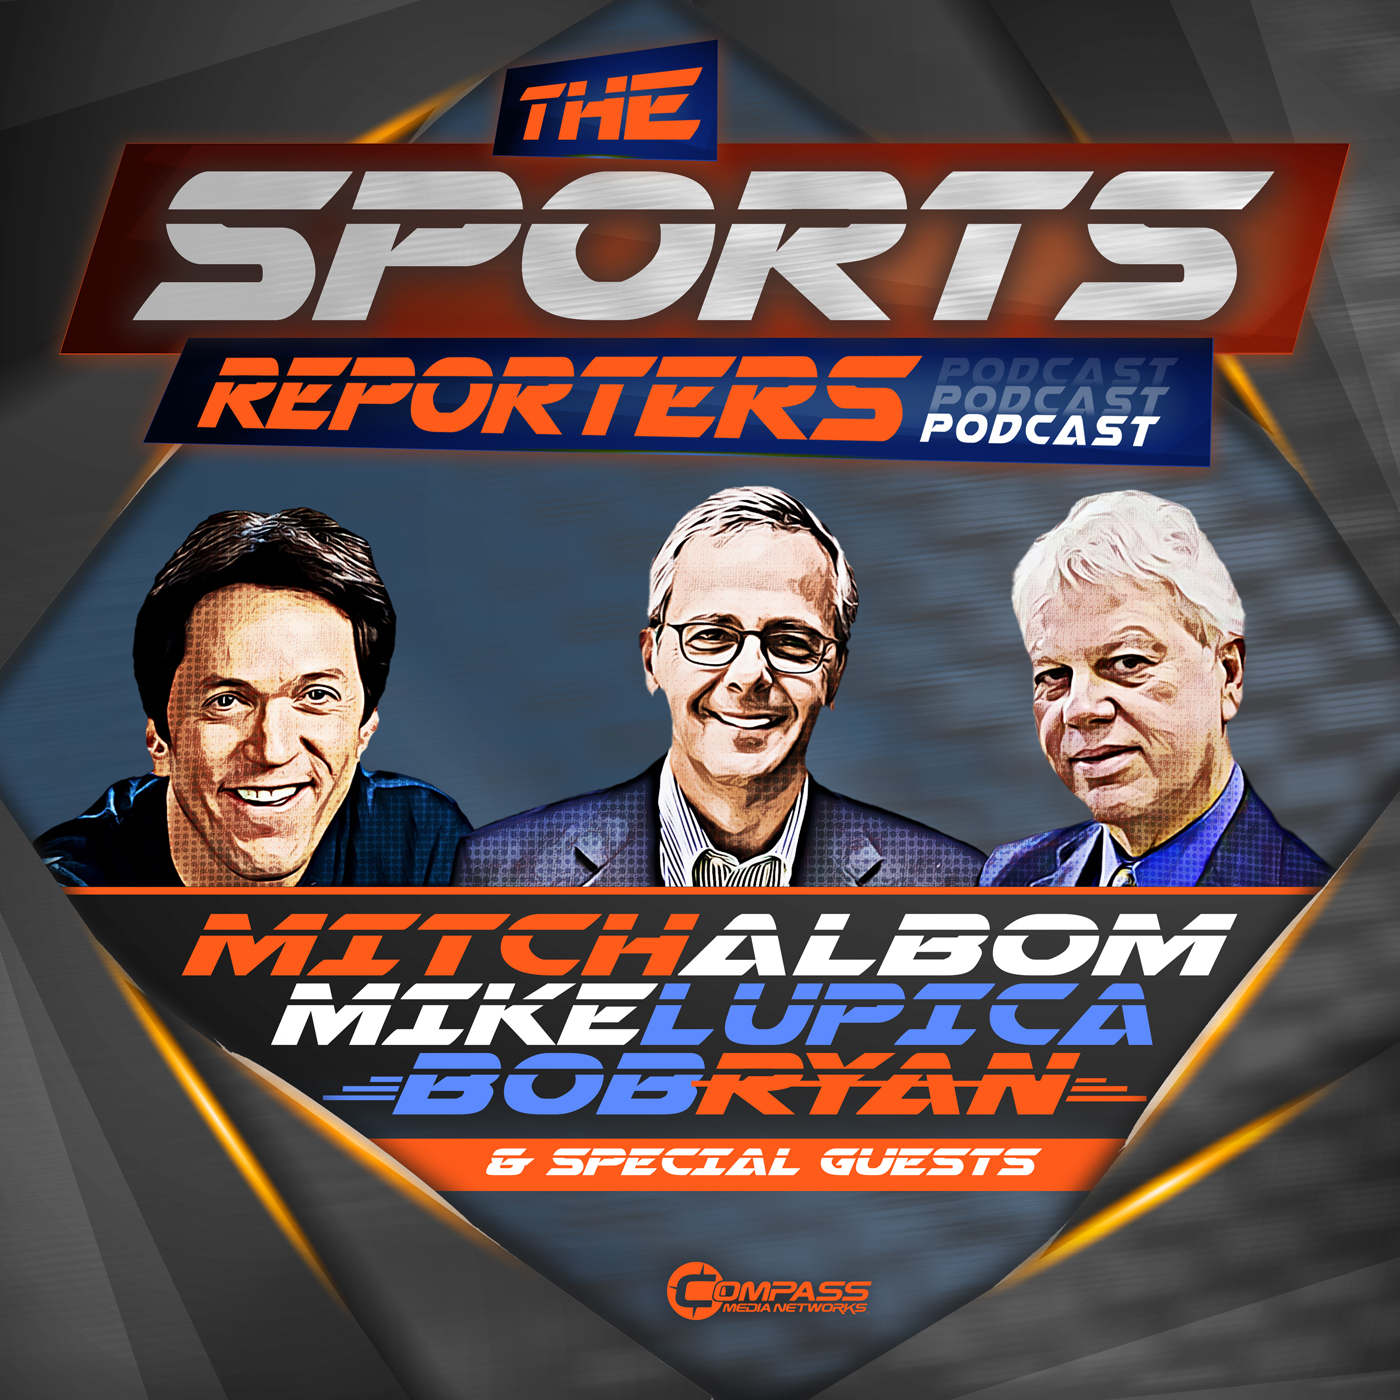 The Sports Reporters - Episode 316 - NBA Conference Finals. NFL Week 2 Craziness. US Open Champion Crowned